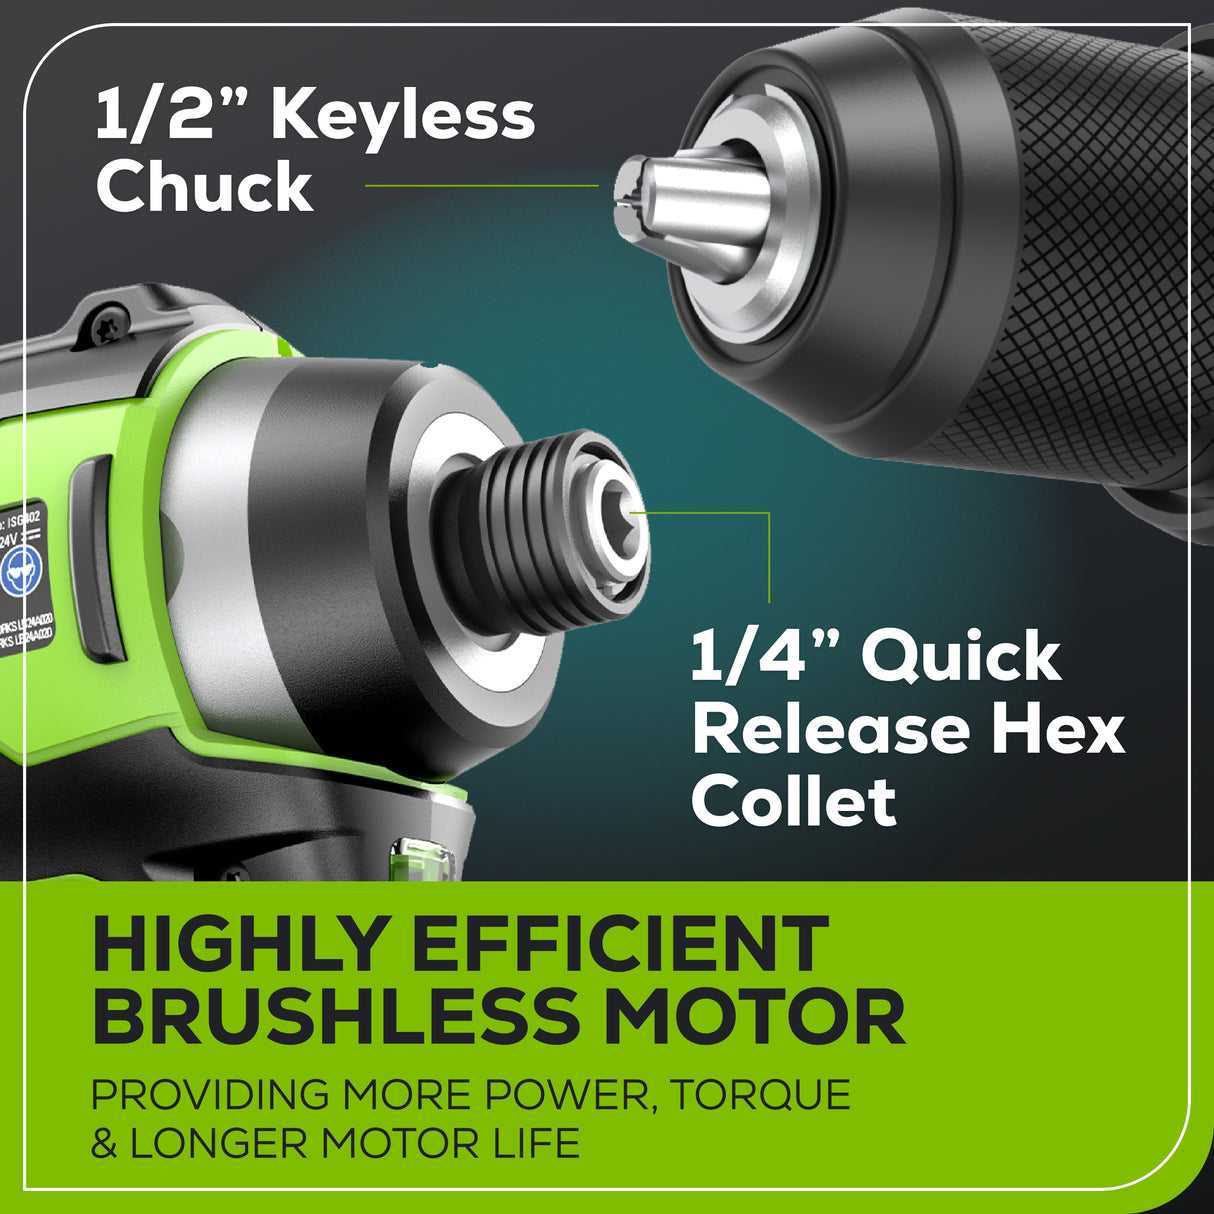 24V Brushless 1/2" Drill/Driver, 1/4" Hex Impact Driver, (2) 2.0Ah Battery & Charger Included Bonus: 8 pc Bit Set